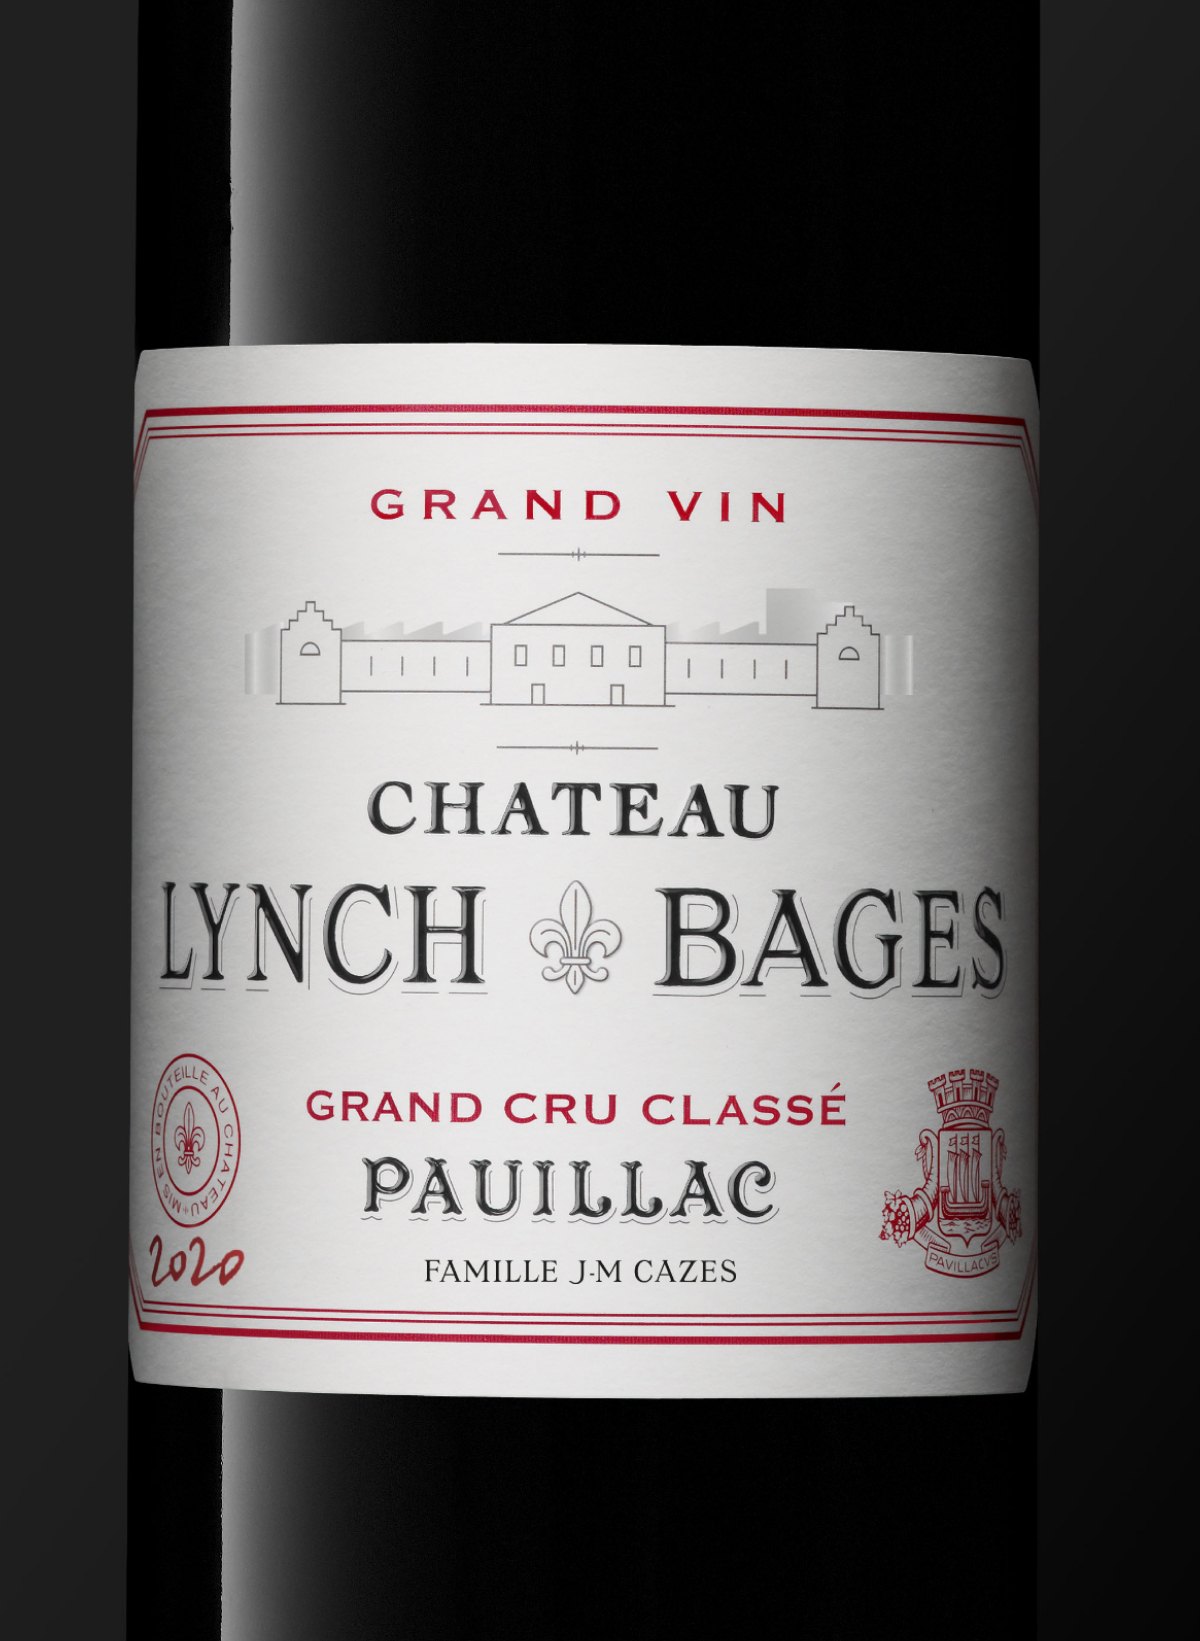 Accueil - Lynch Bages